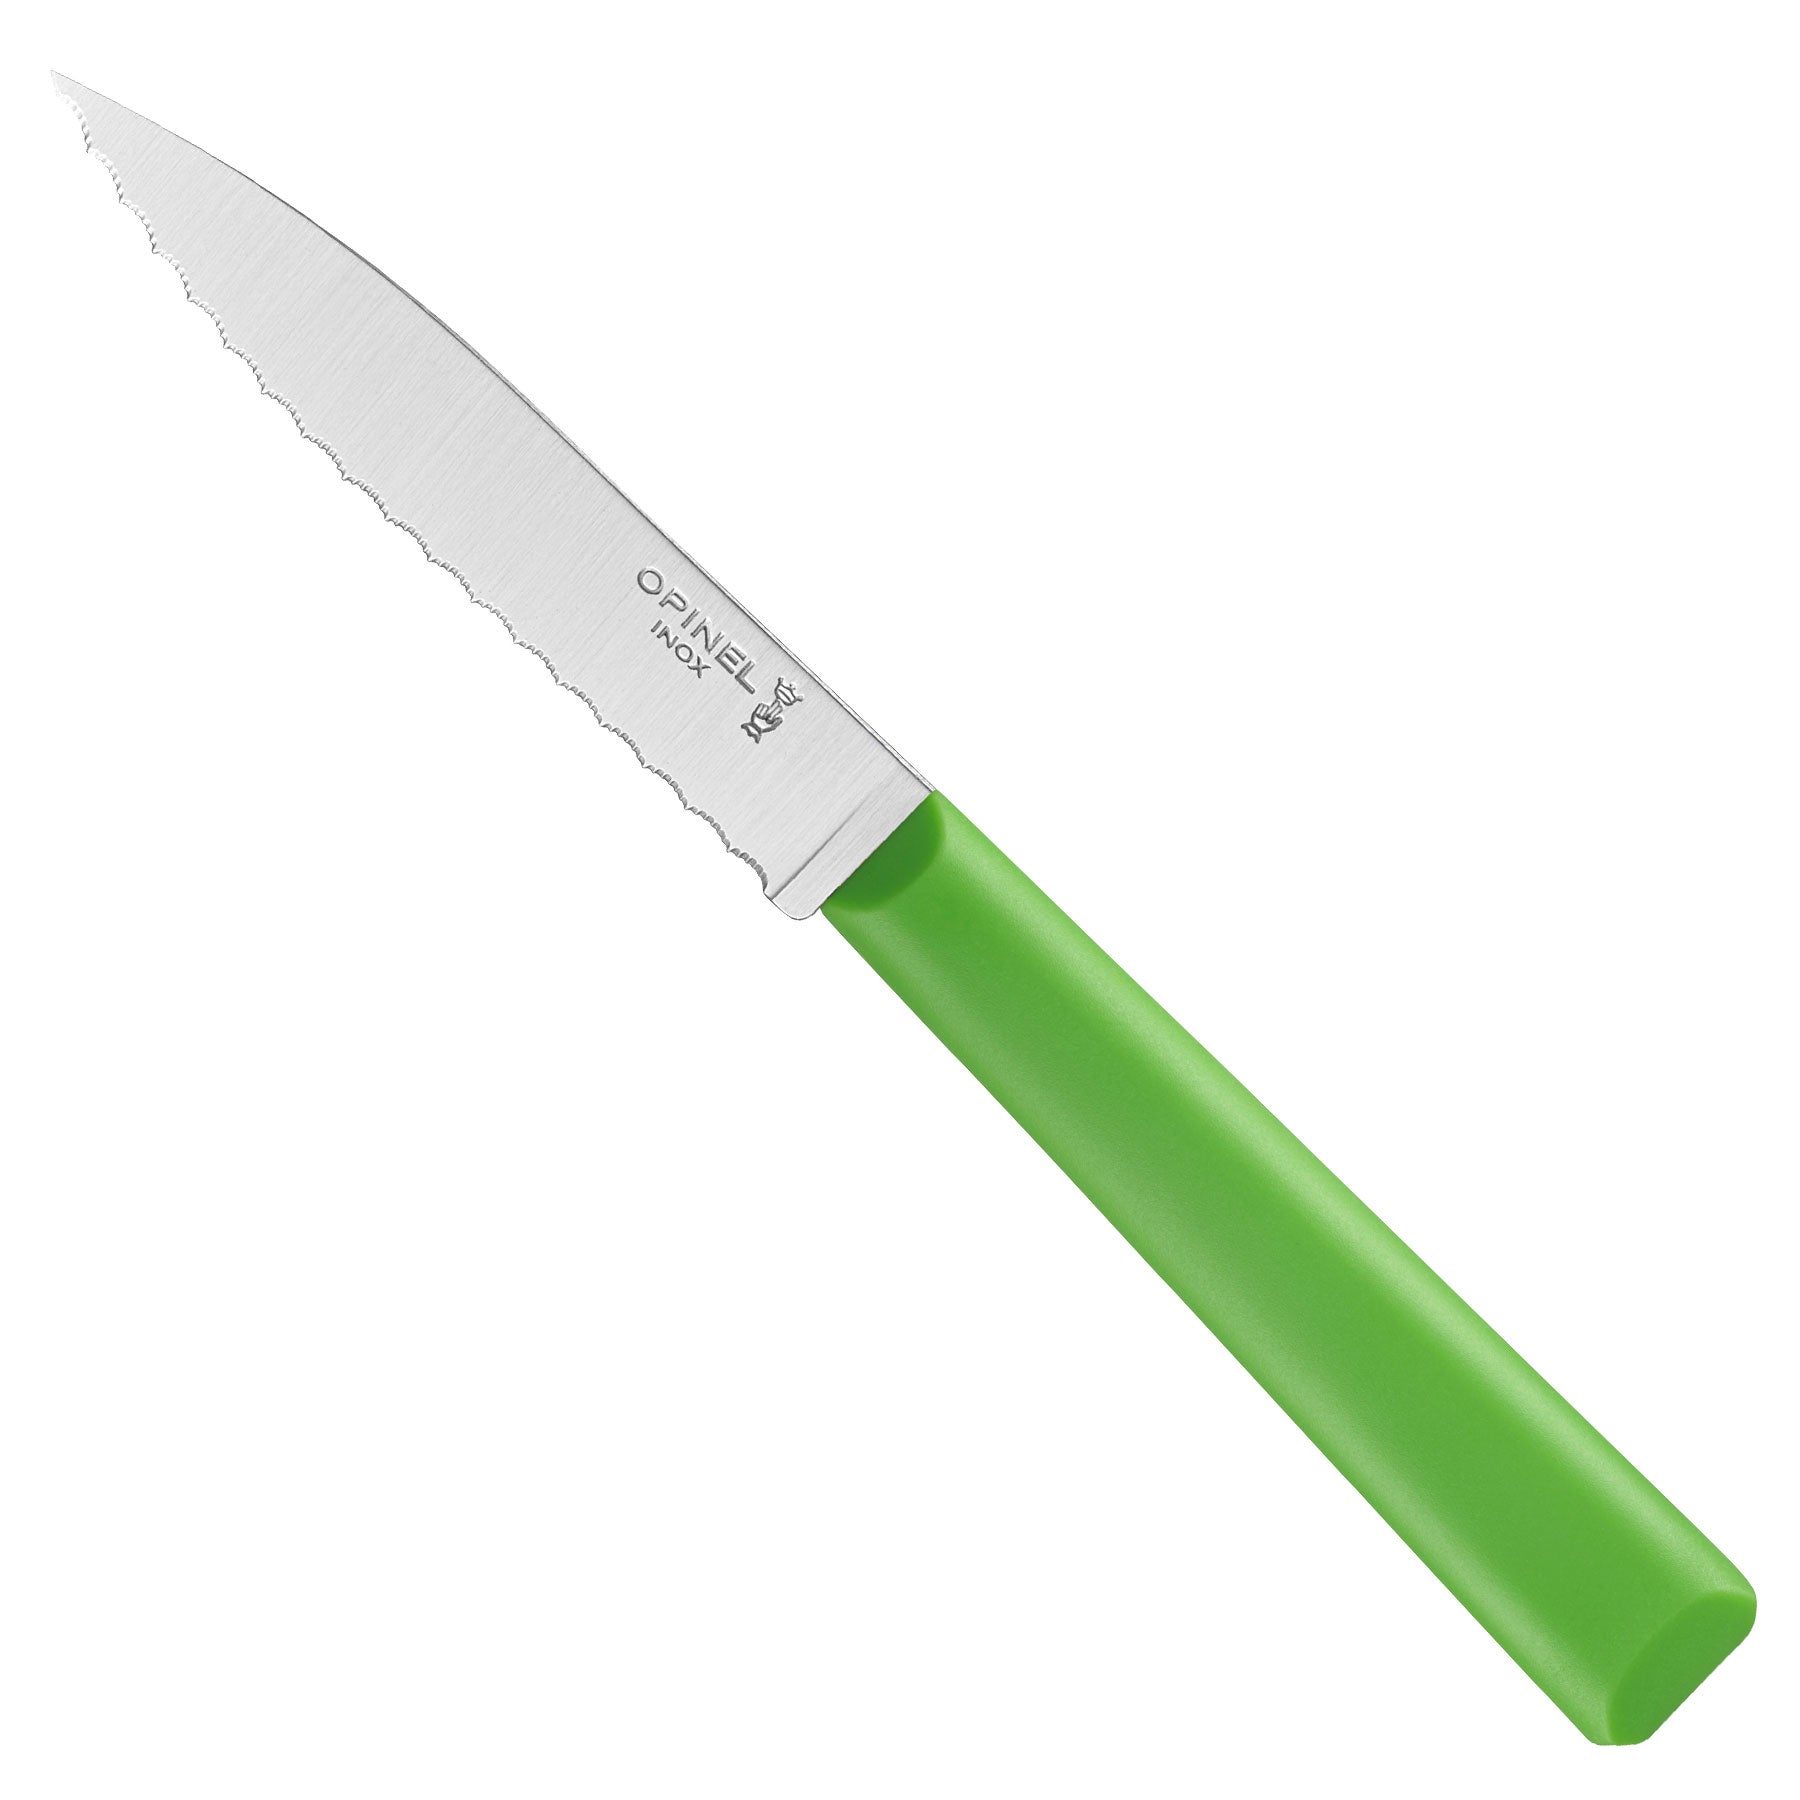  OAKSWARE Paring Knife, 4 inch Small Kitchen Knife